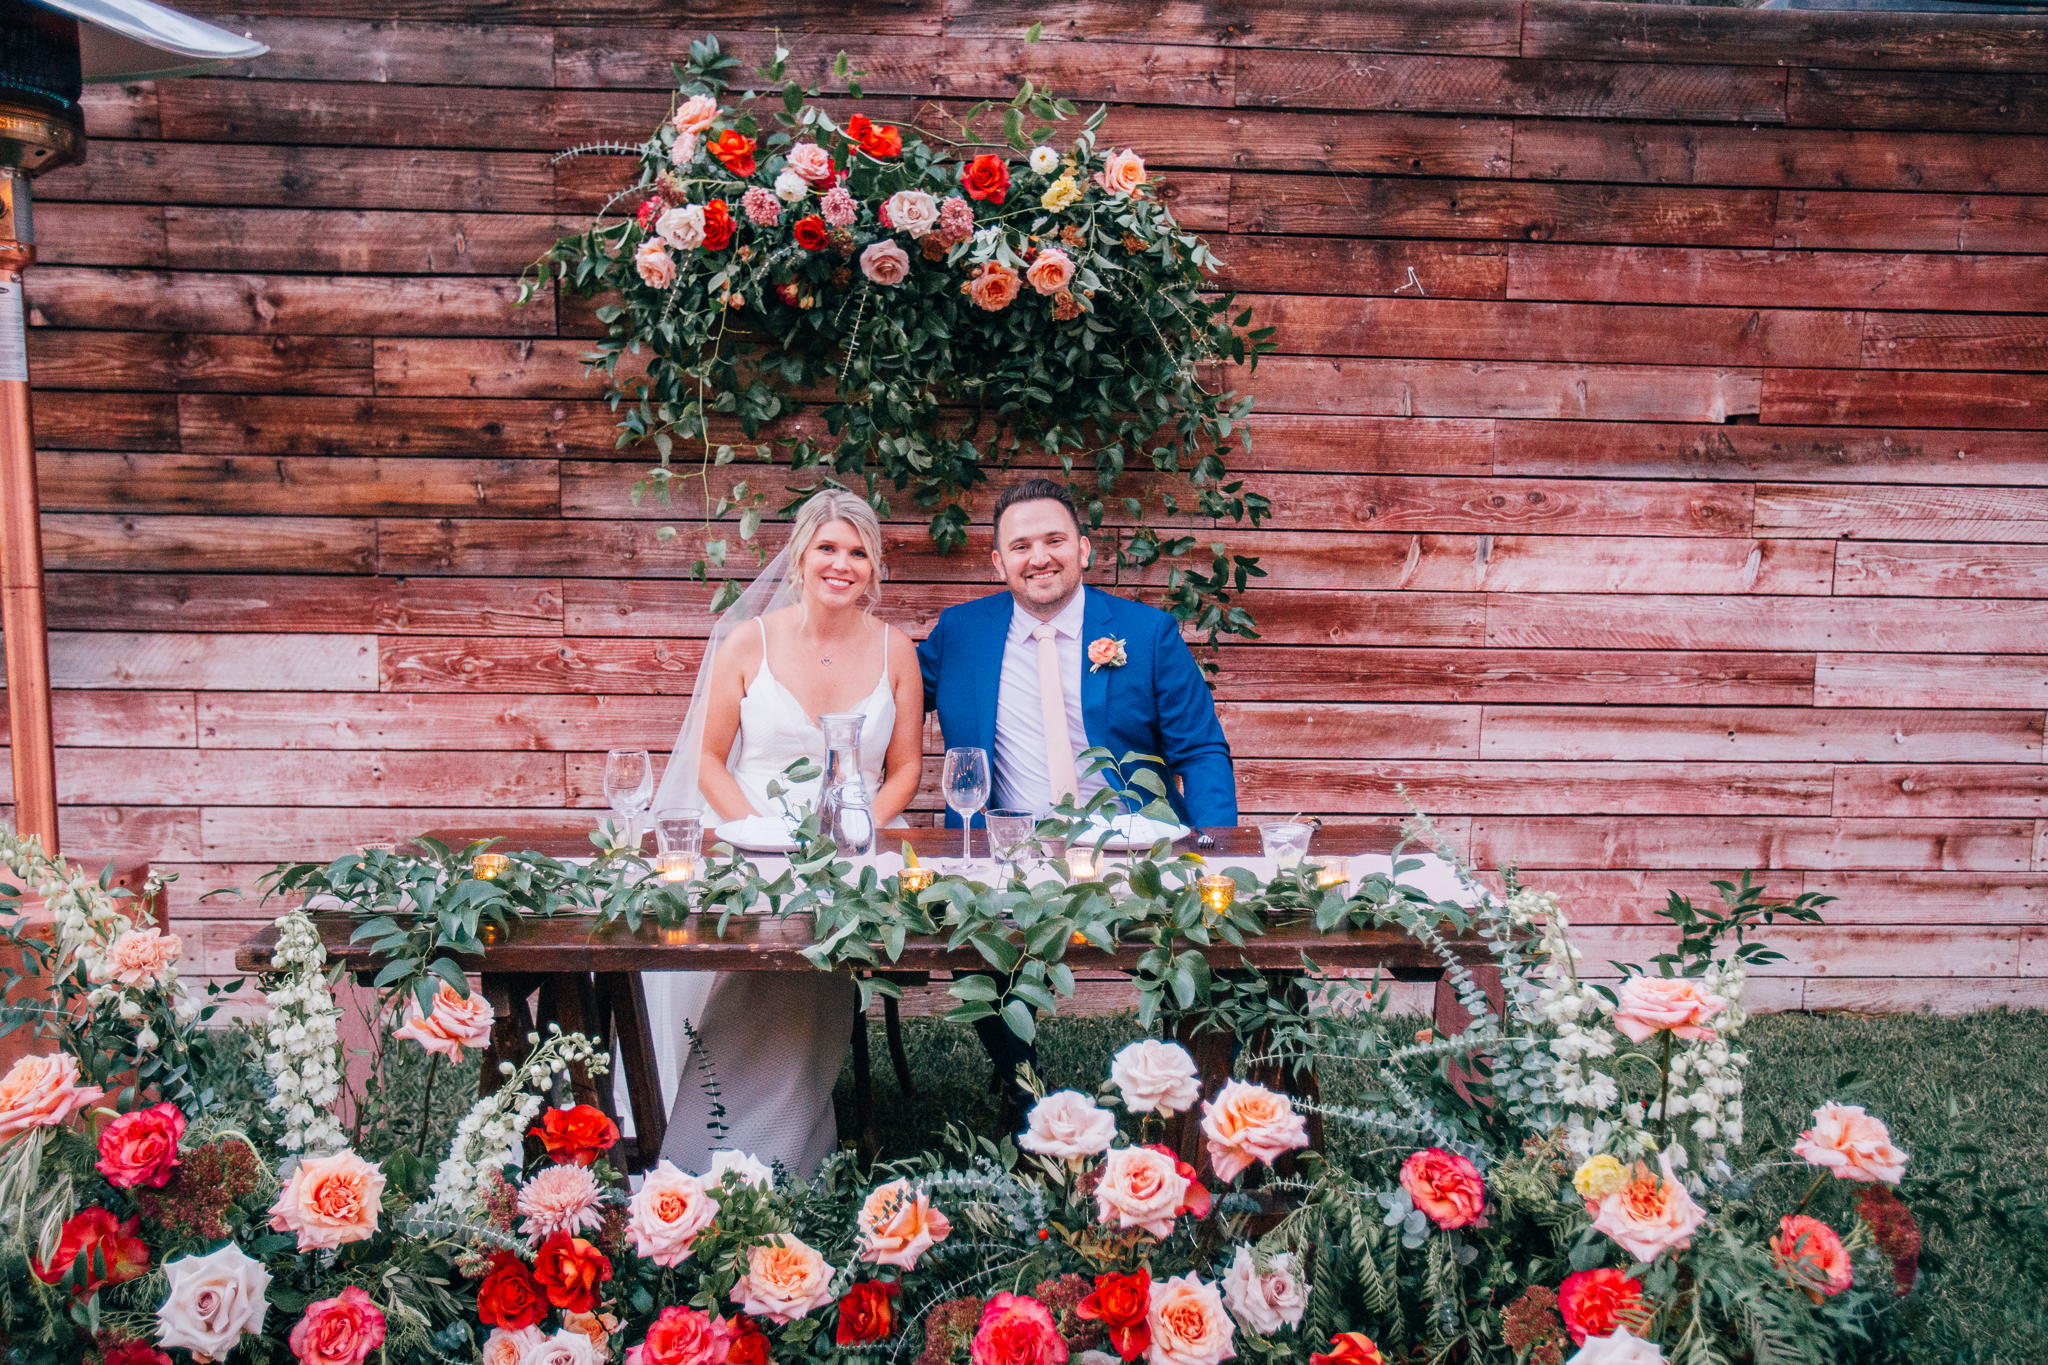 bride and groom at sweetheart table surrounded by bright and colorful florals